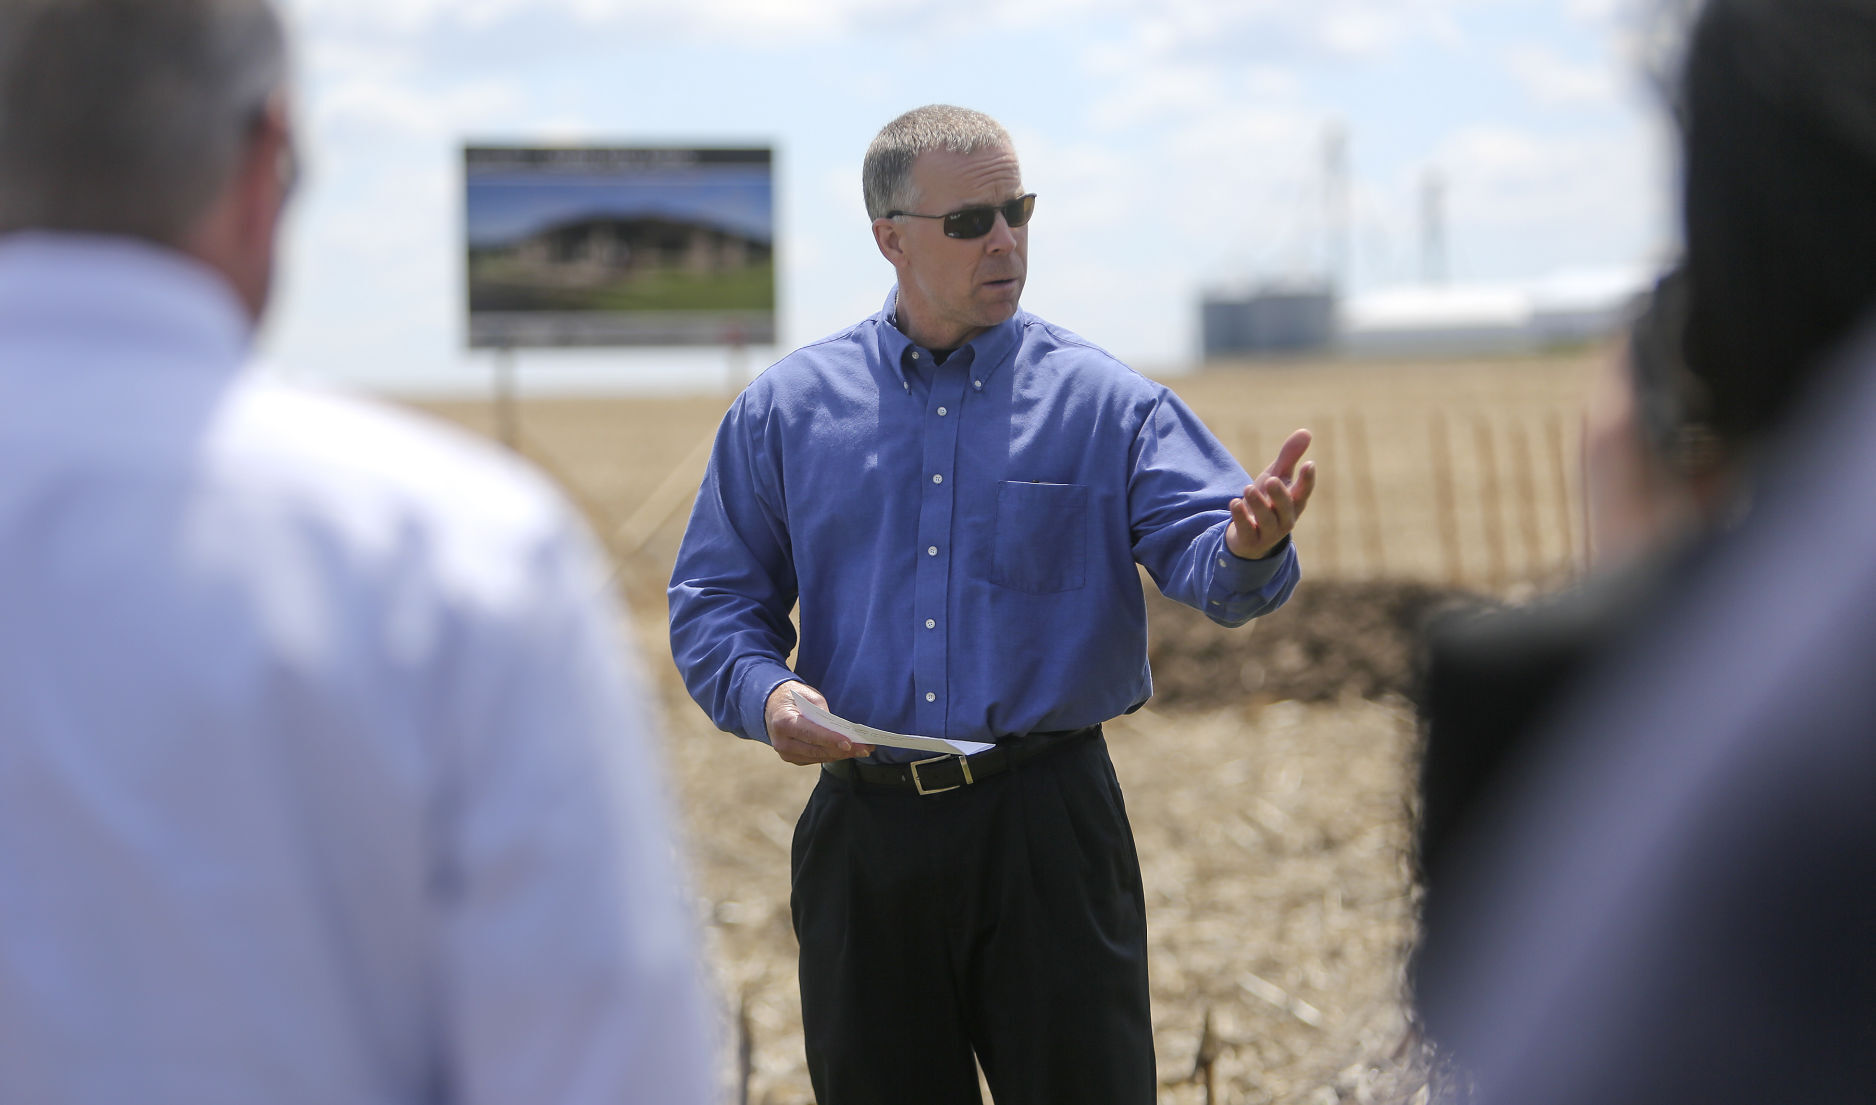 Southwest Health CEO Dan Rohrbach speaks during a groundbreaking for a new Cuba City, Wis., primary care clinic on Wednesday, May 12, 2021. PHOTO CREDIT: Dave Kettering